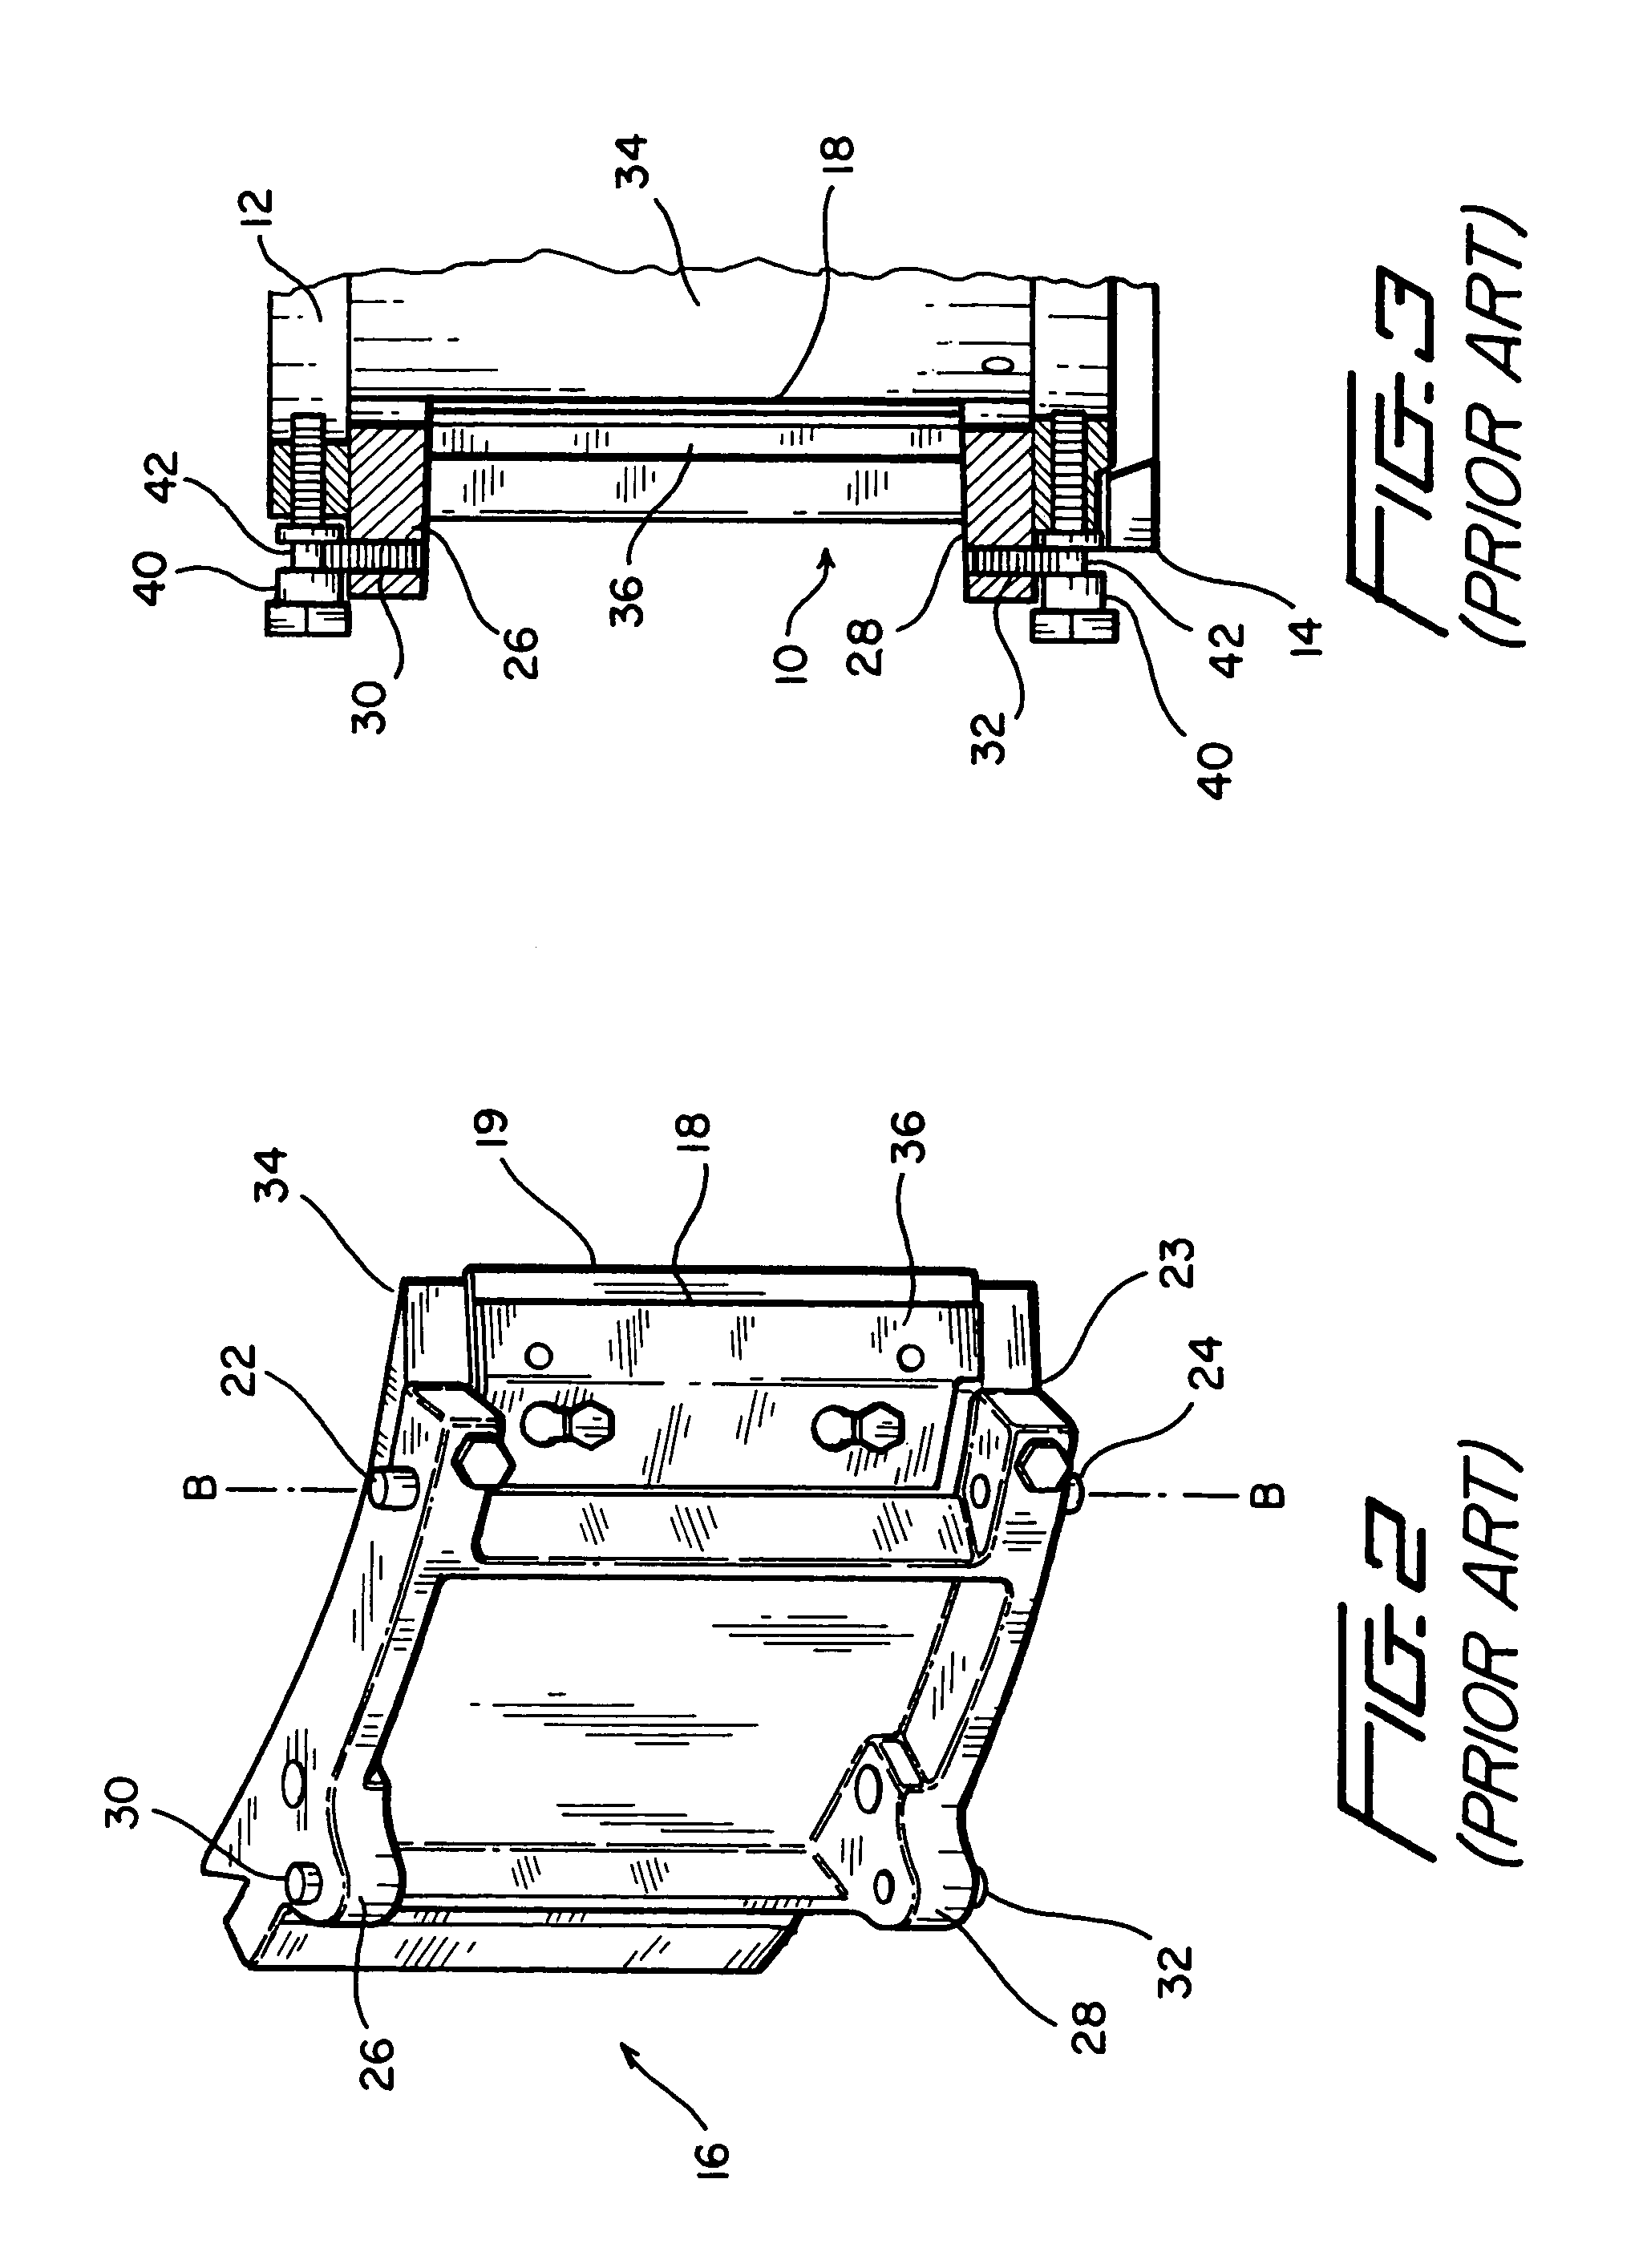 Cutting head for cutting a food product